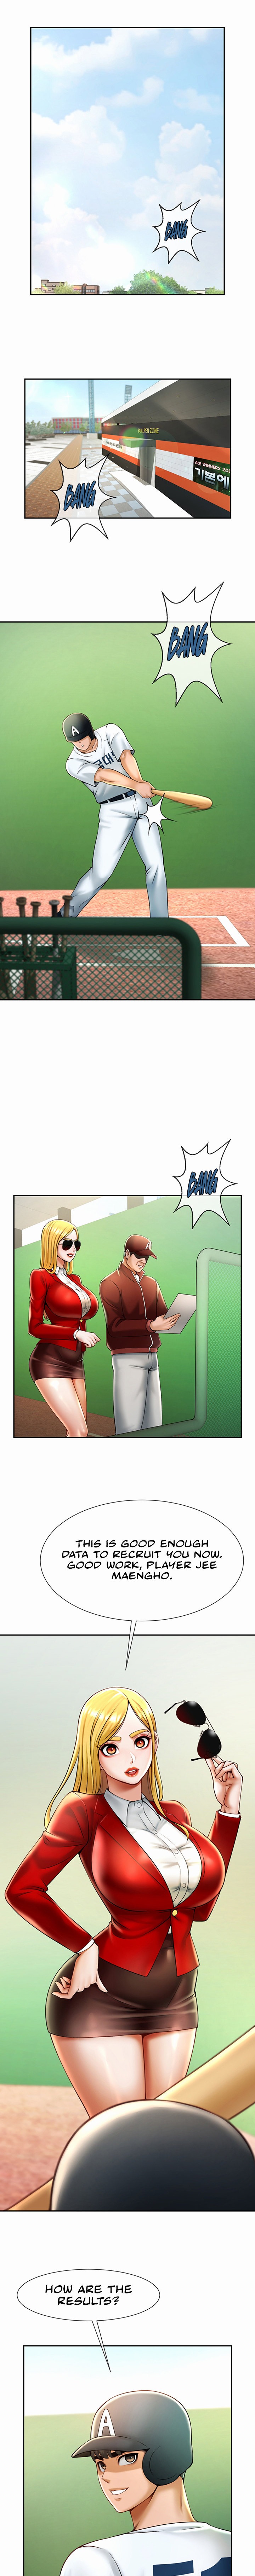 The Cheat Code Hitter Fucks Them All - Chapter 12 Page 5